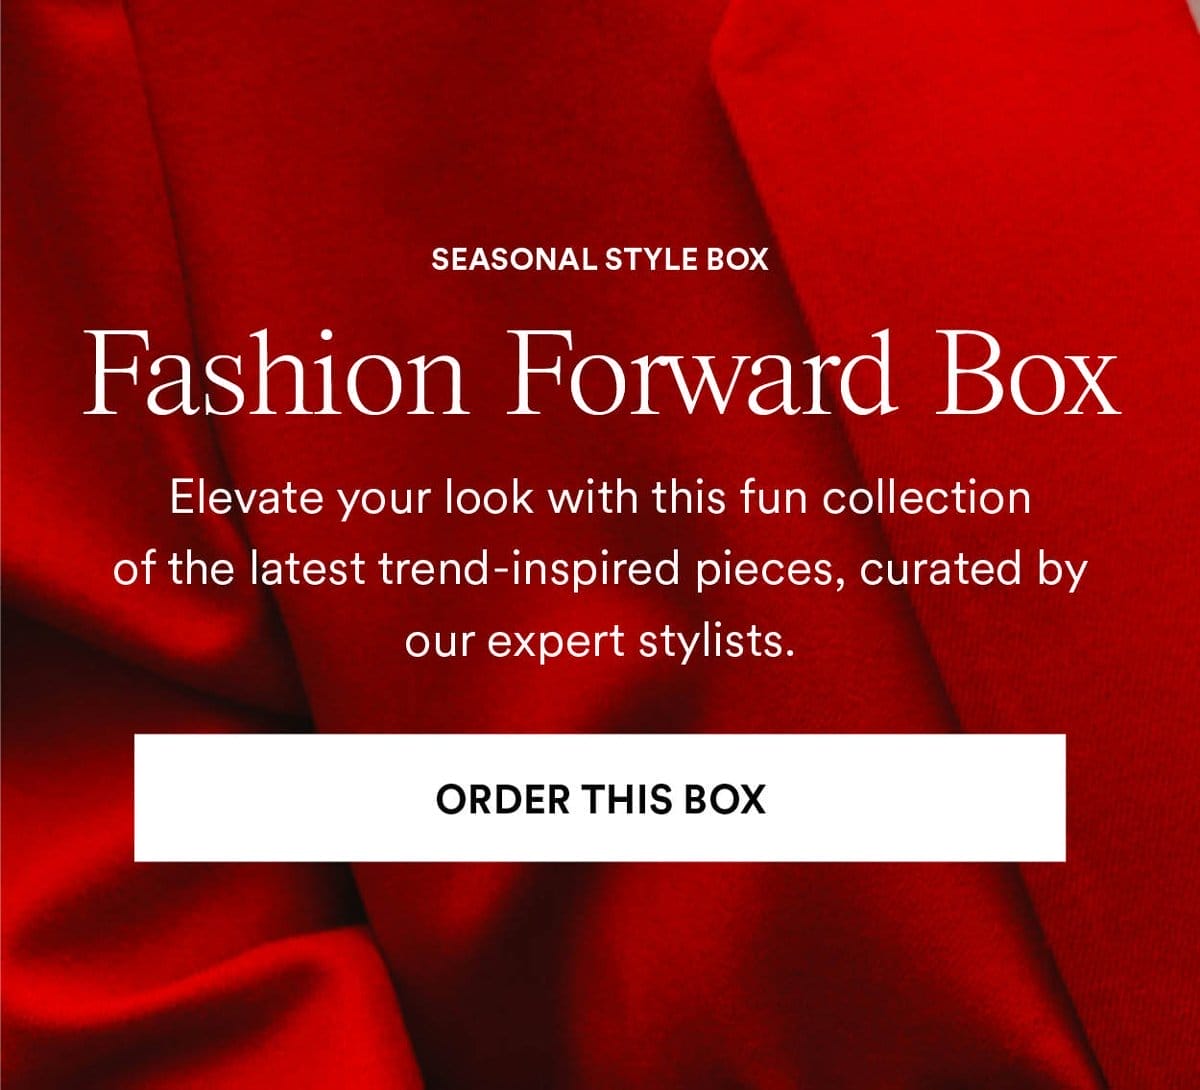 Fashion Forward Box. Elevate your look with this fun collection of the latest trend-inspired pieces, curated by our stylists. Order This Box